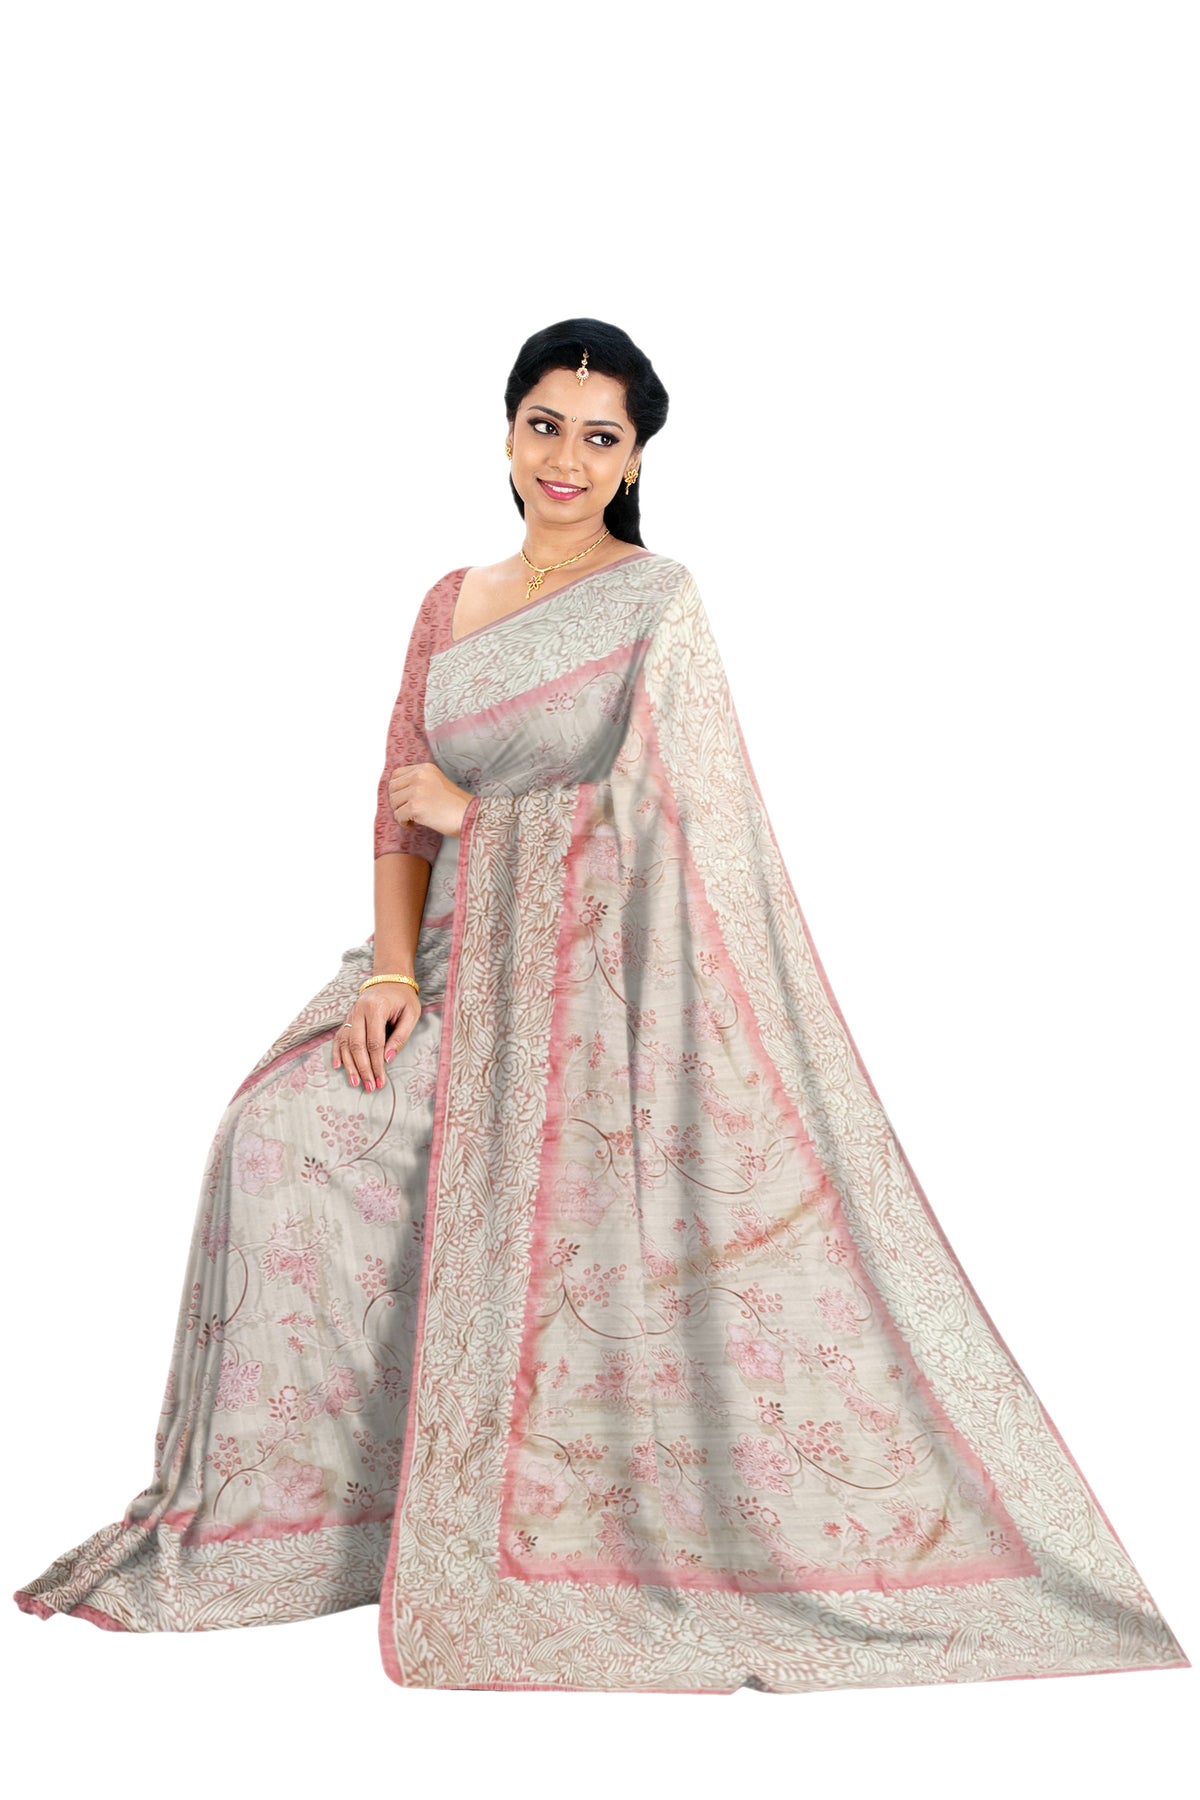 Off white Tussar Cut Work Saree with Pink Flowers